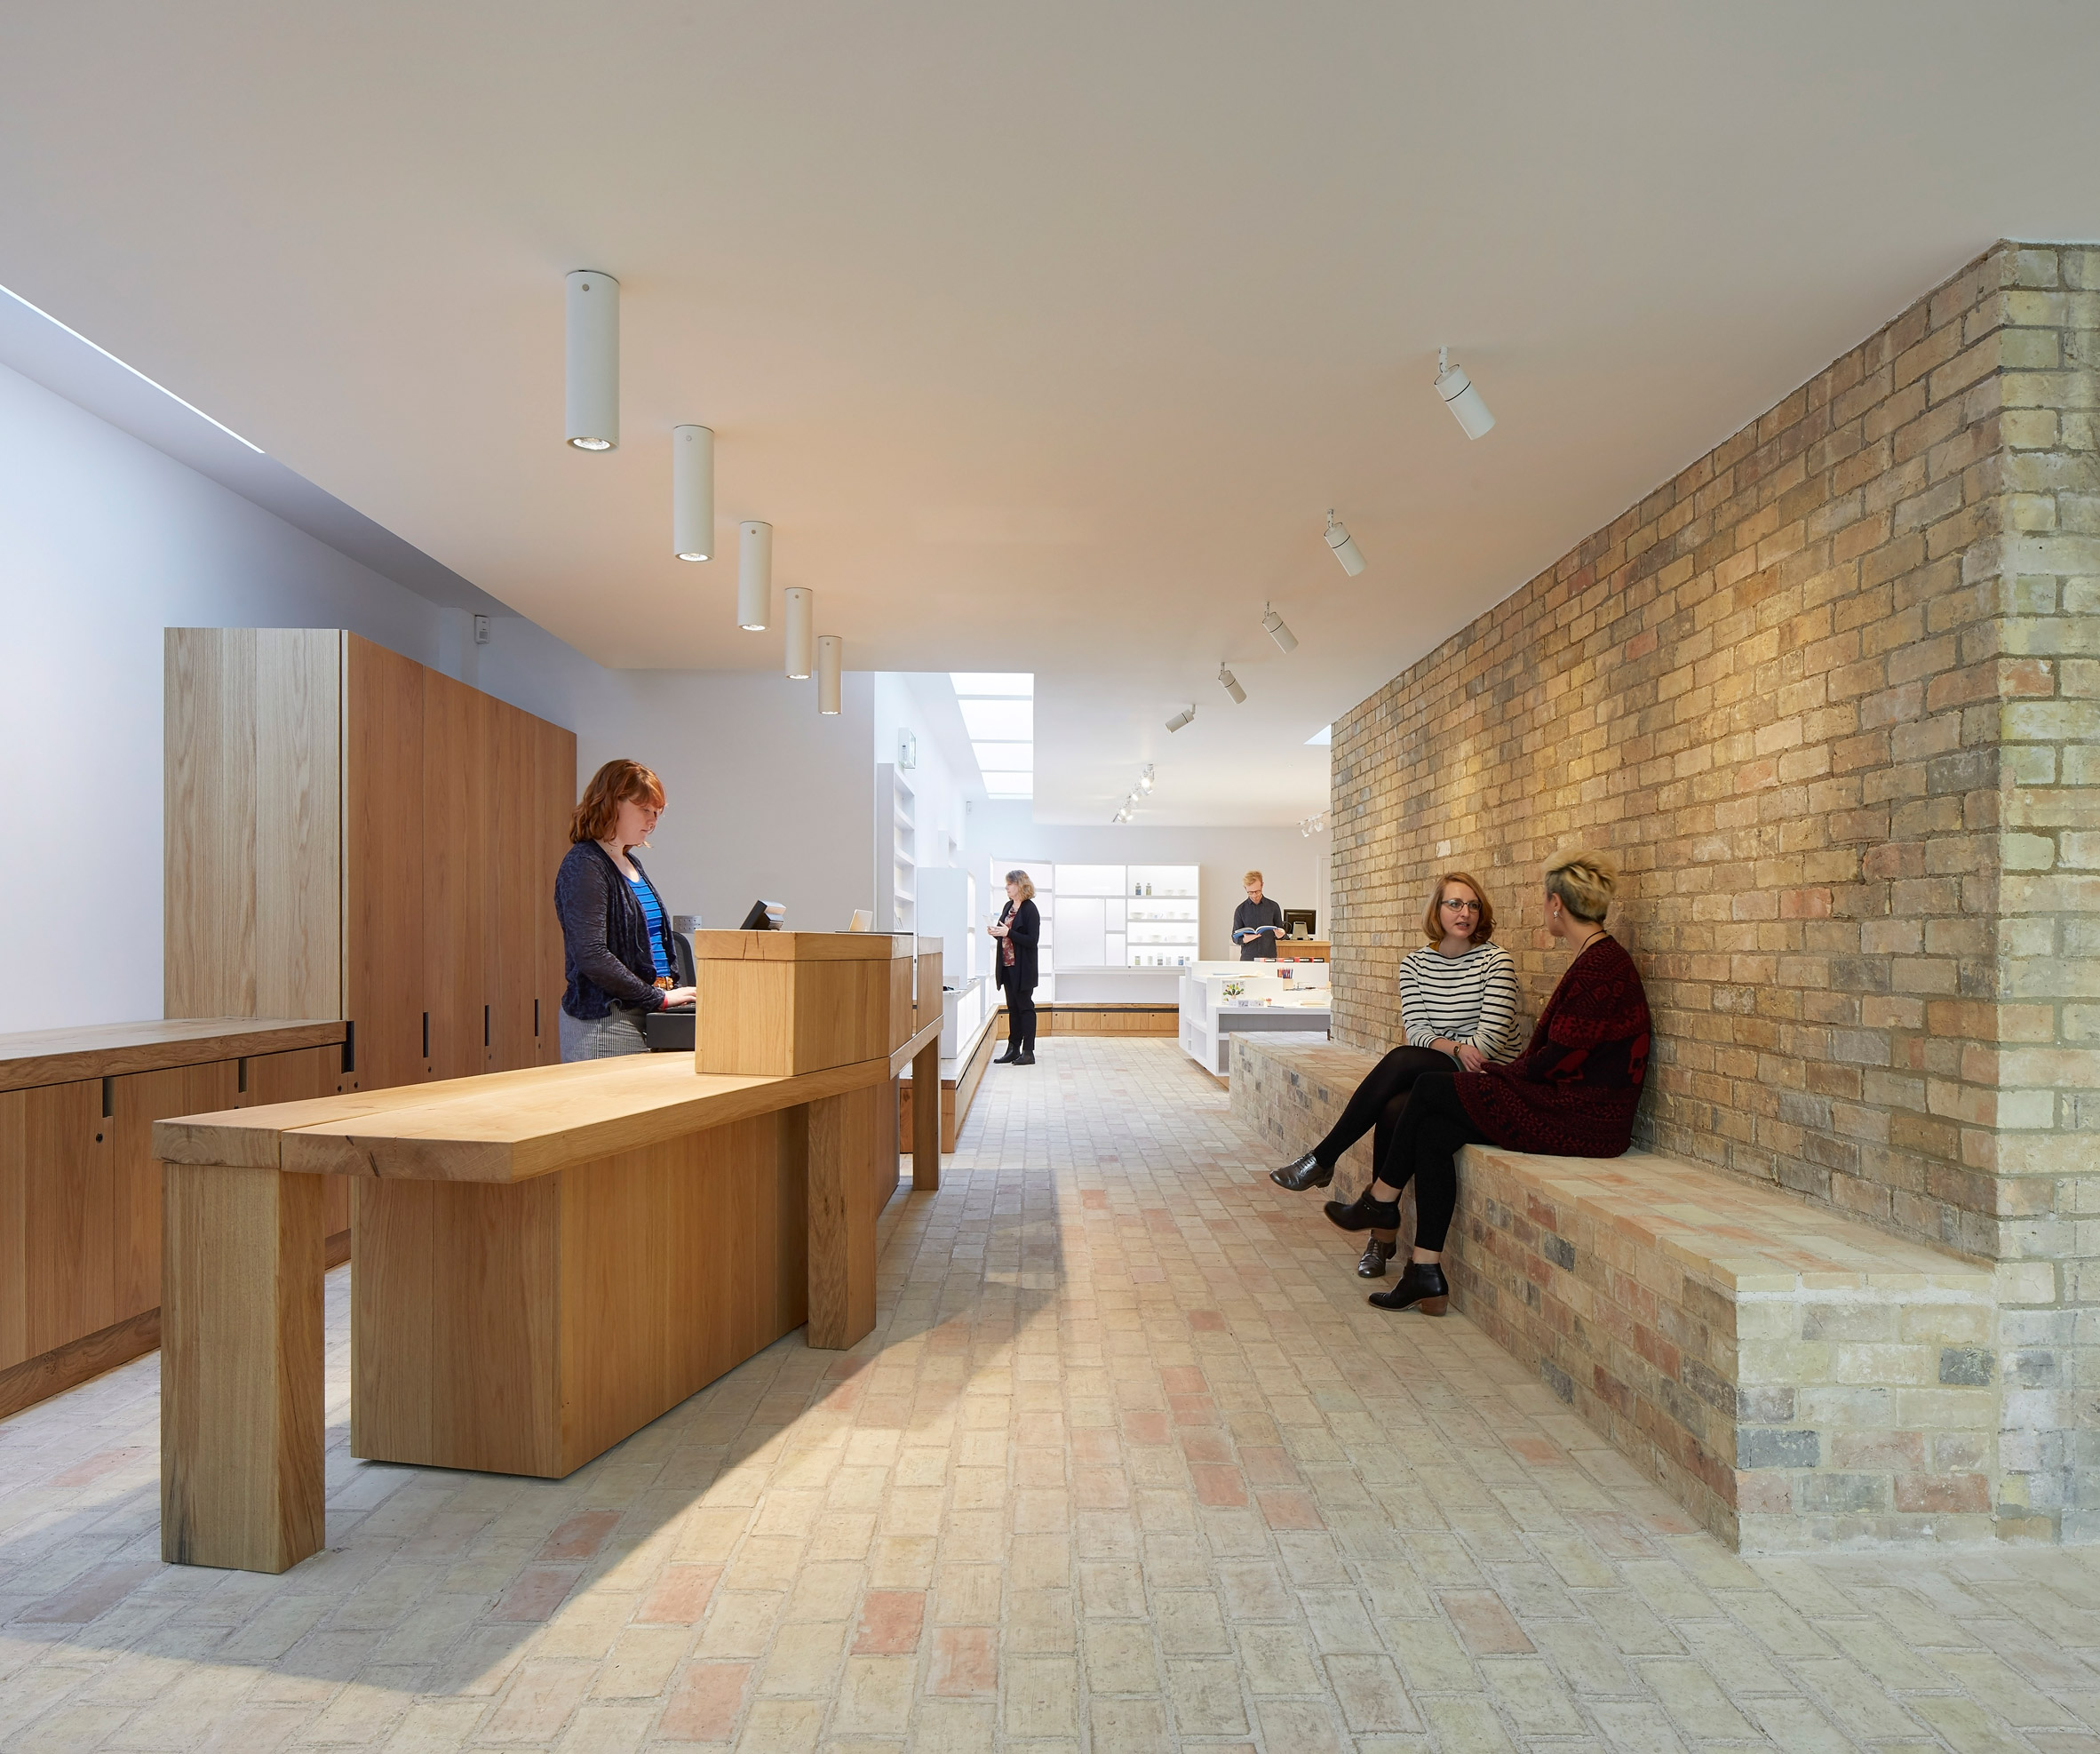 Jamie Fobert’s Kettle's Yard extension echoes "domestic scale and calm aesthetic" of existing gallery